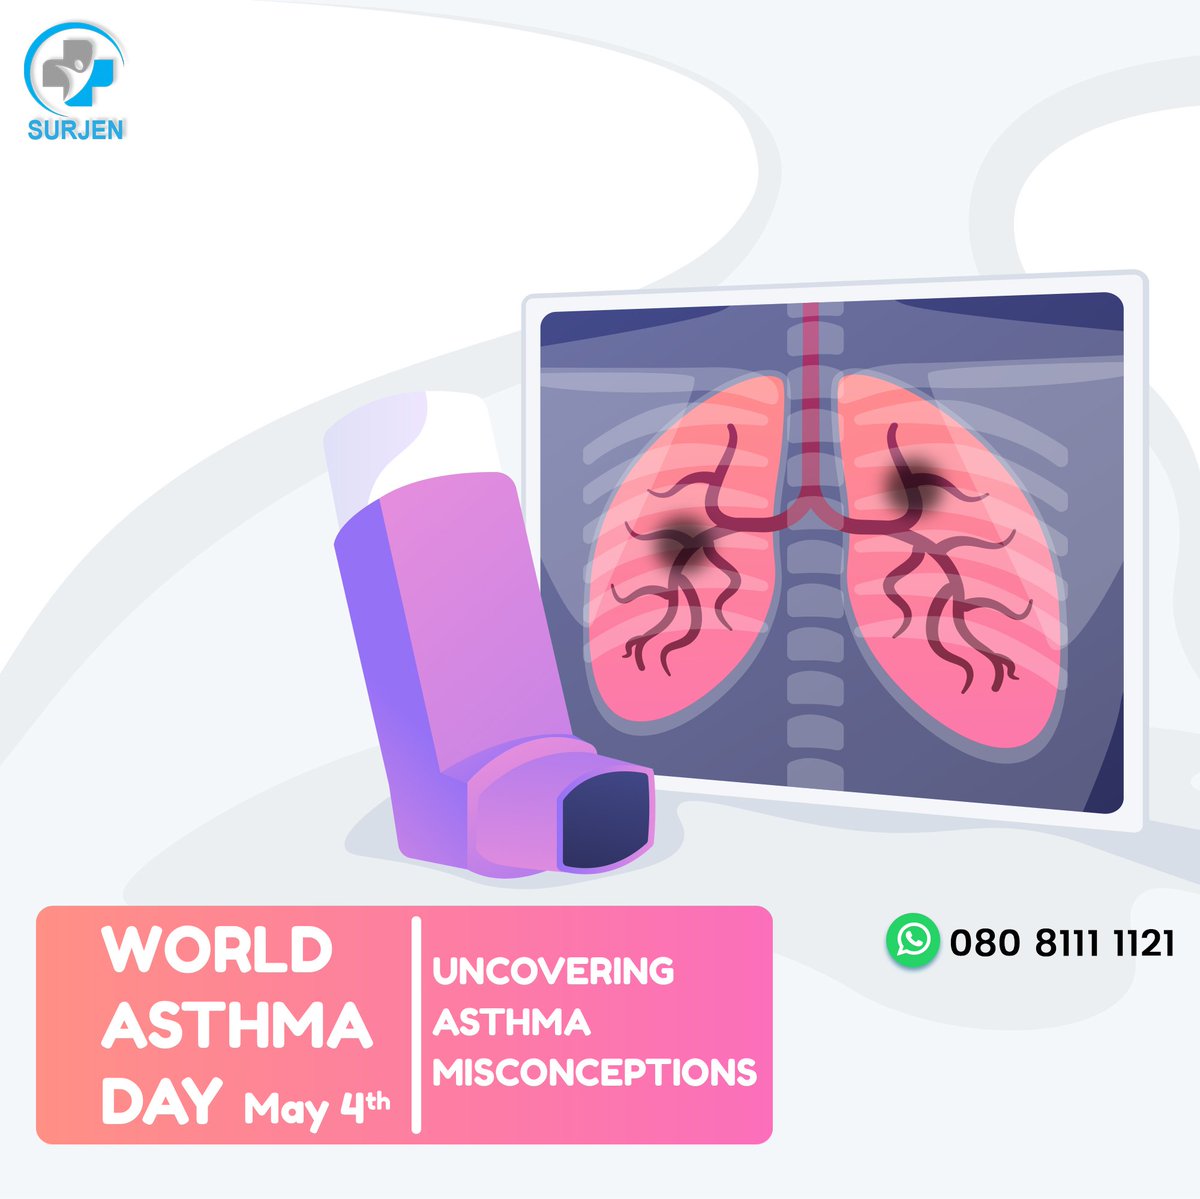 Even for an asthmatic patient, breathing fine is a reality. An inhaler makes it possible. Spread awareness and safe guard your loved ones.

#Asthmaday #WorldAsthmaDay